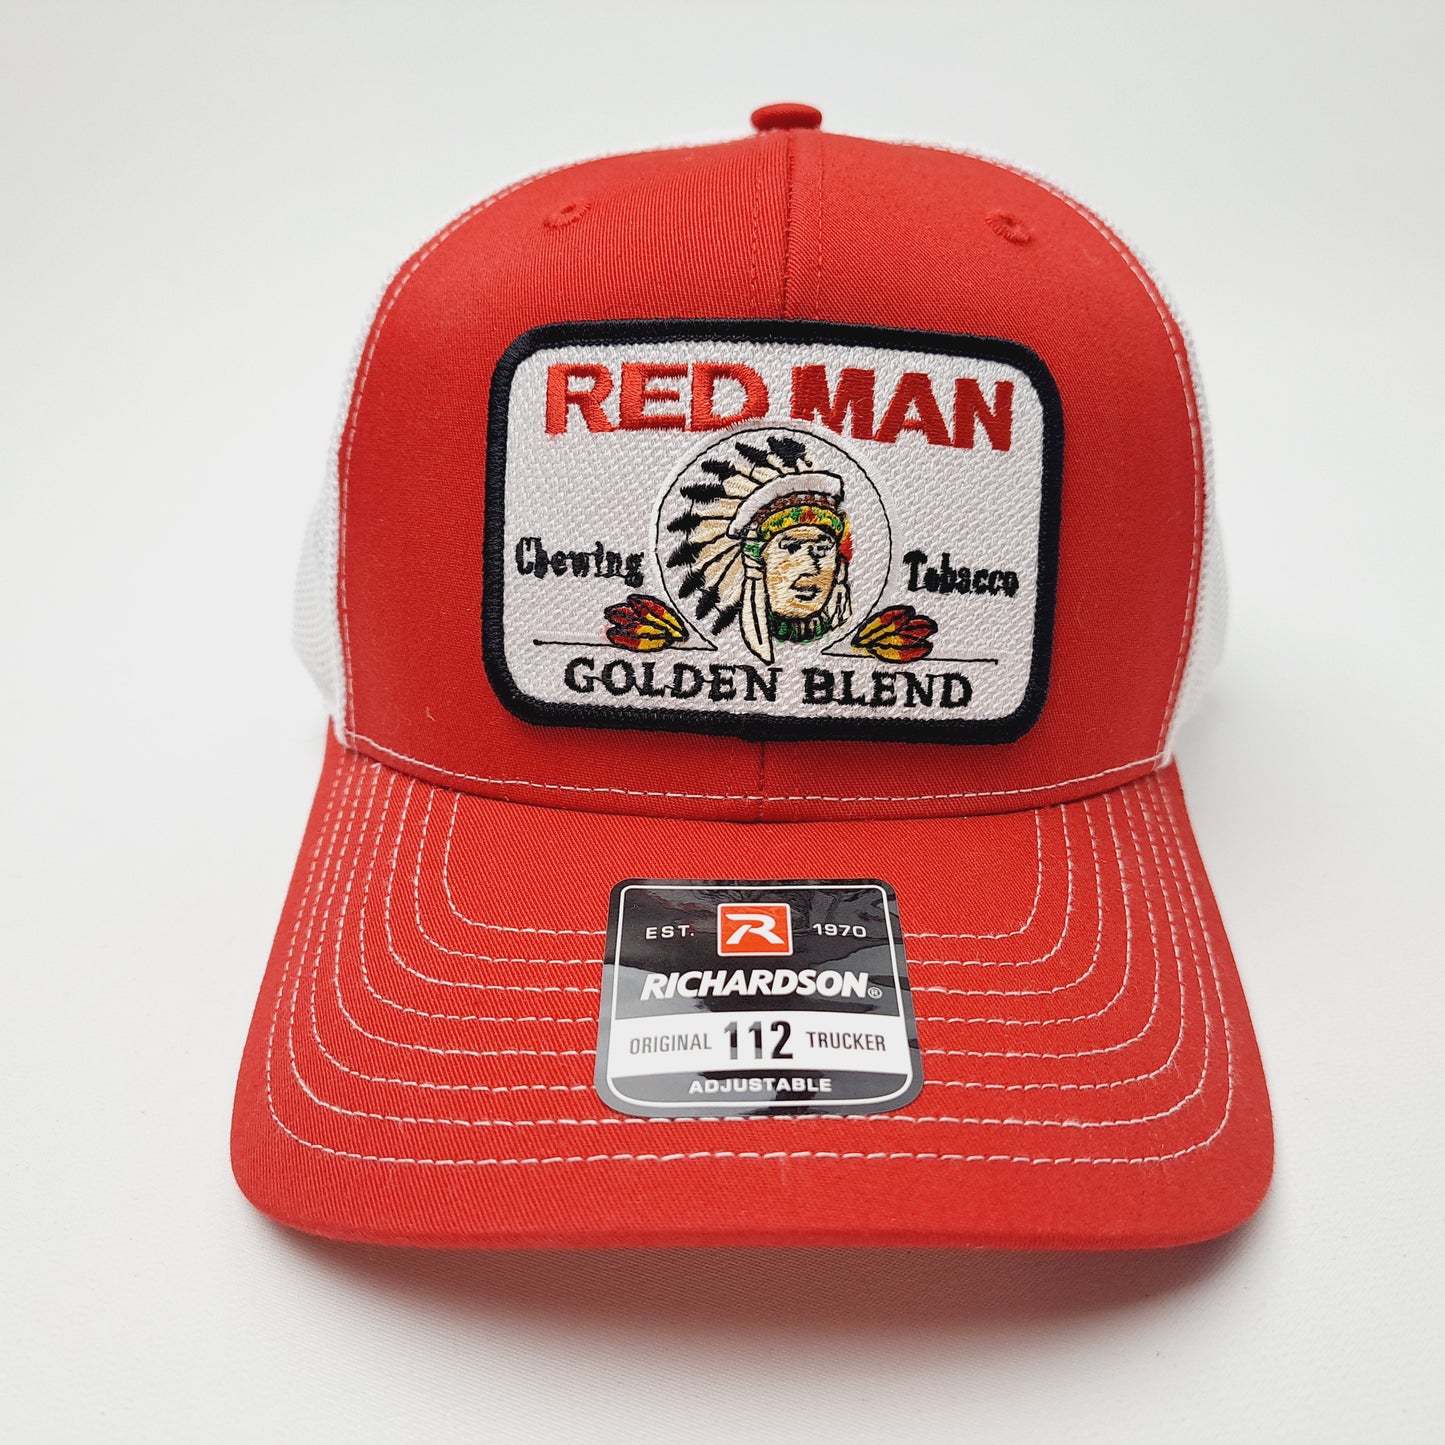 Redman Red Man Embroidered Patch Richardson 112 Trucker Mesh Snapback Cap Hat Red & White